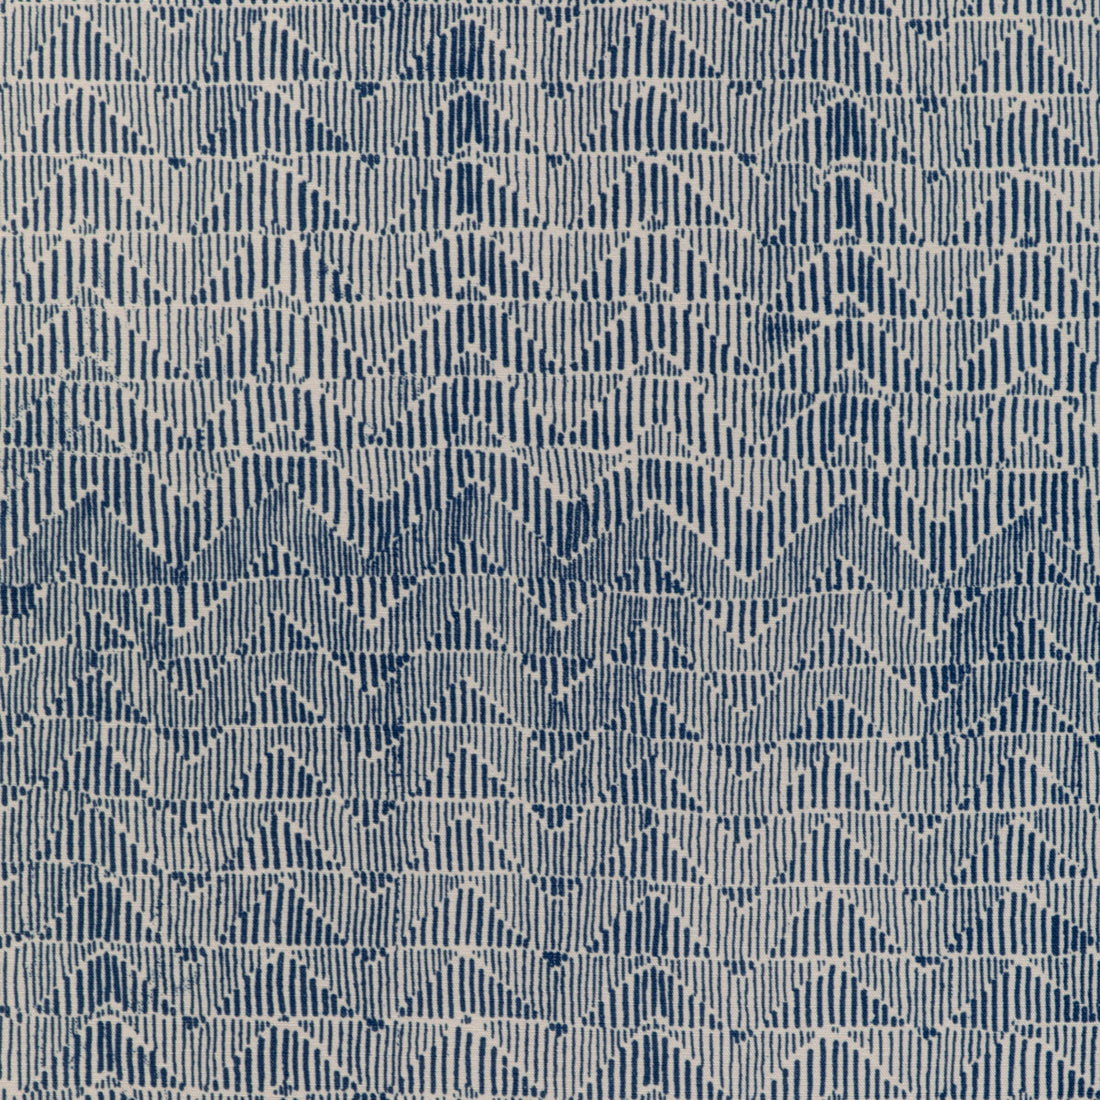 Les Cigales Print fabric in indigo color - pattern 8024112.50.0 - by Brunschwig &amp; Fils in the Les Ensembliers L&